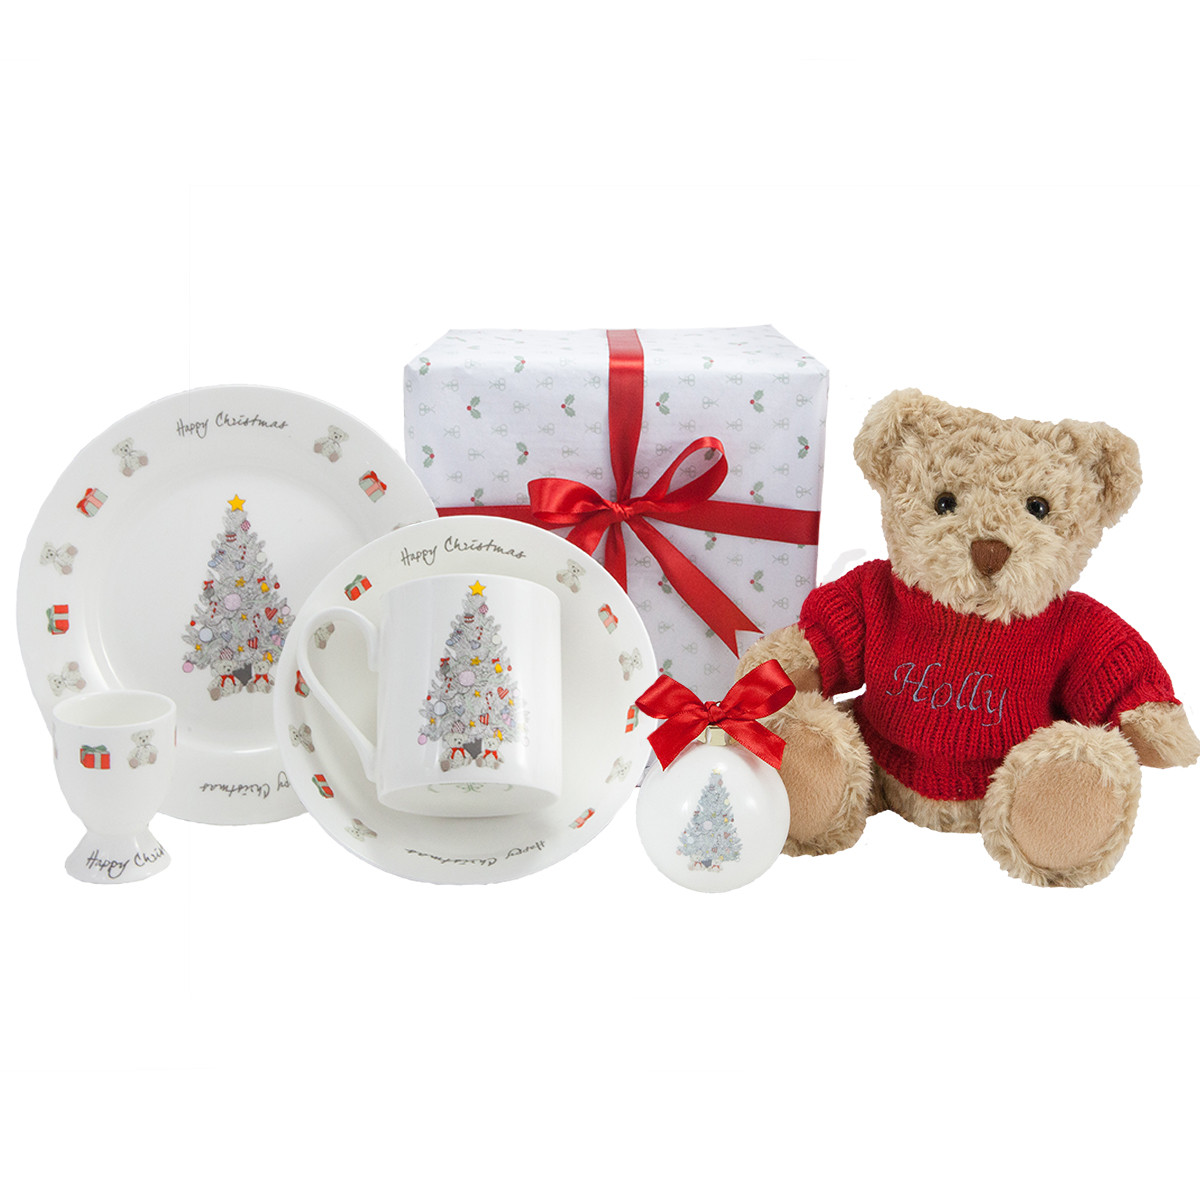 Baby Christmas Gift Ideas
 The Syders Baby s First Christmas Gift Ideas